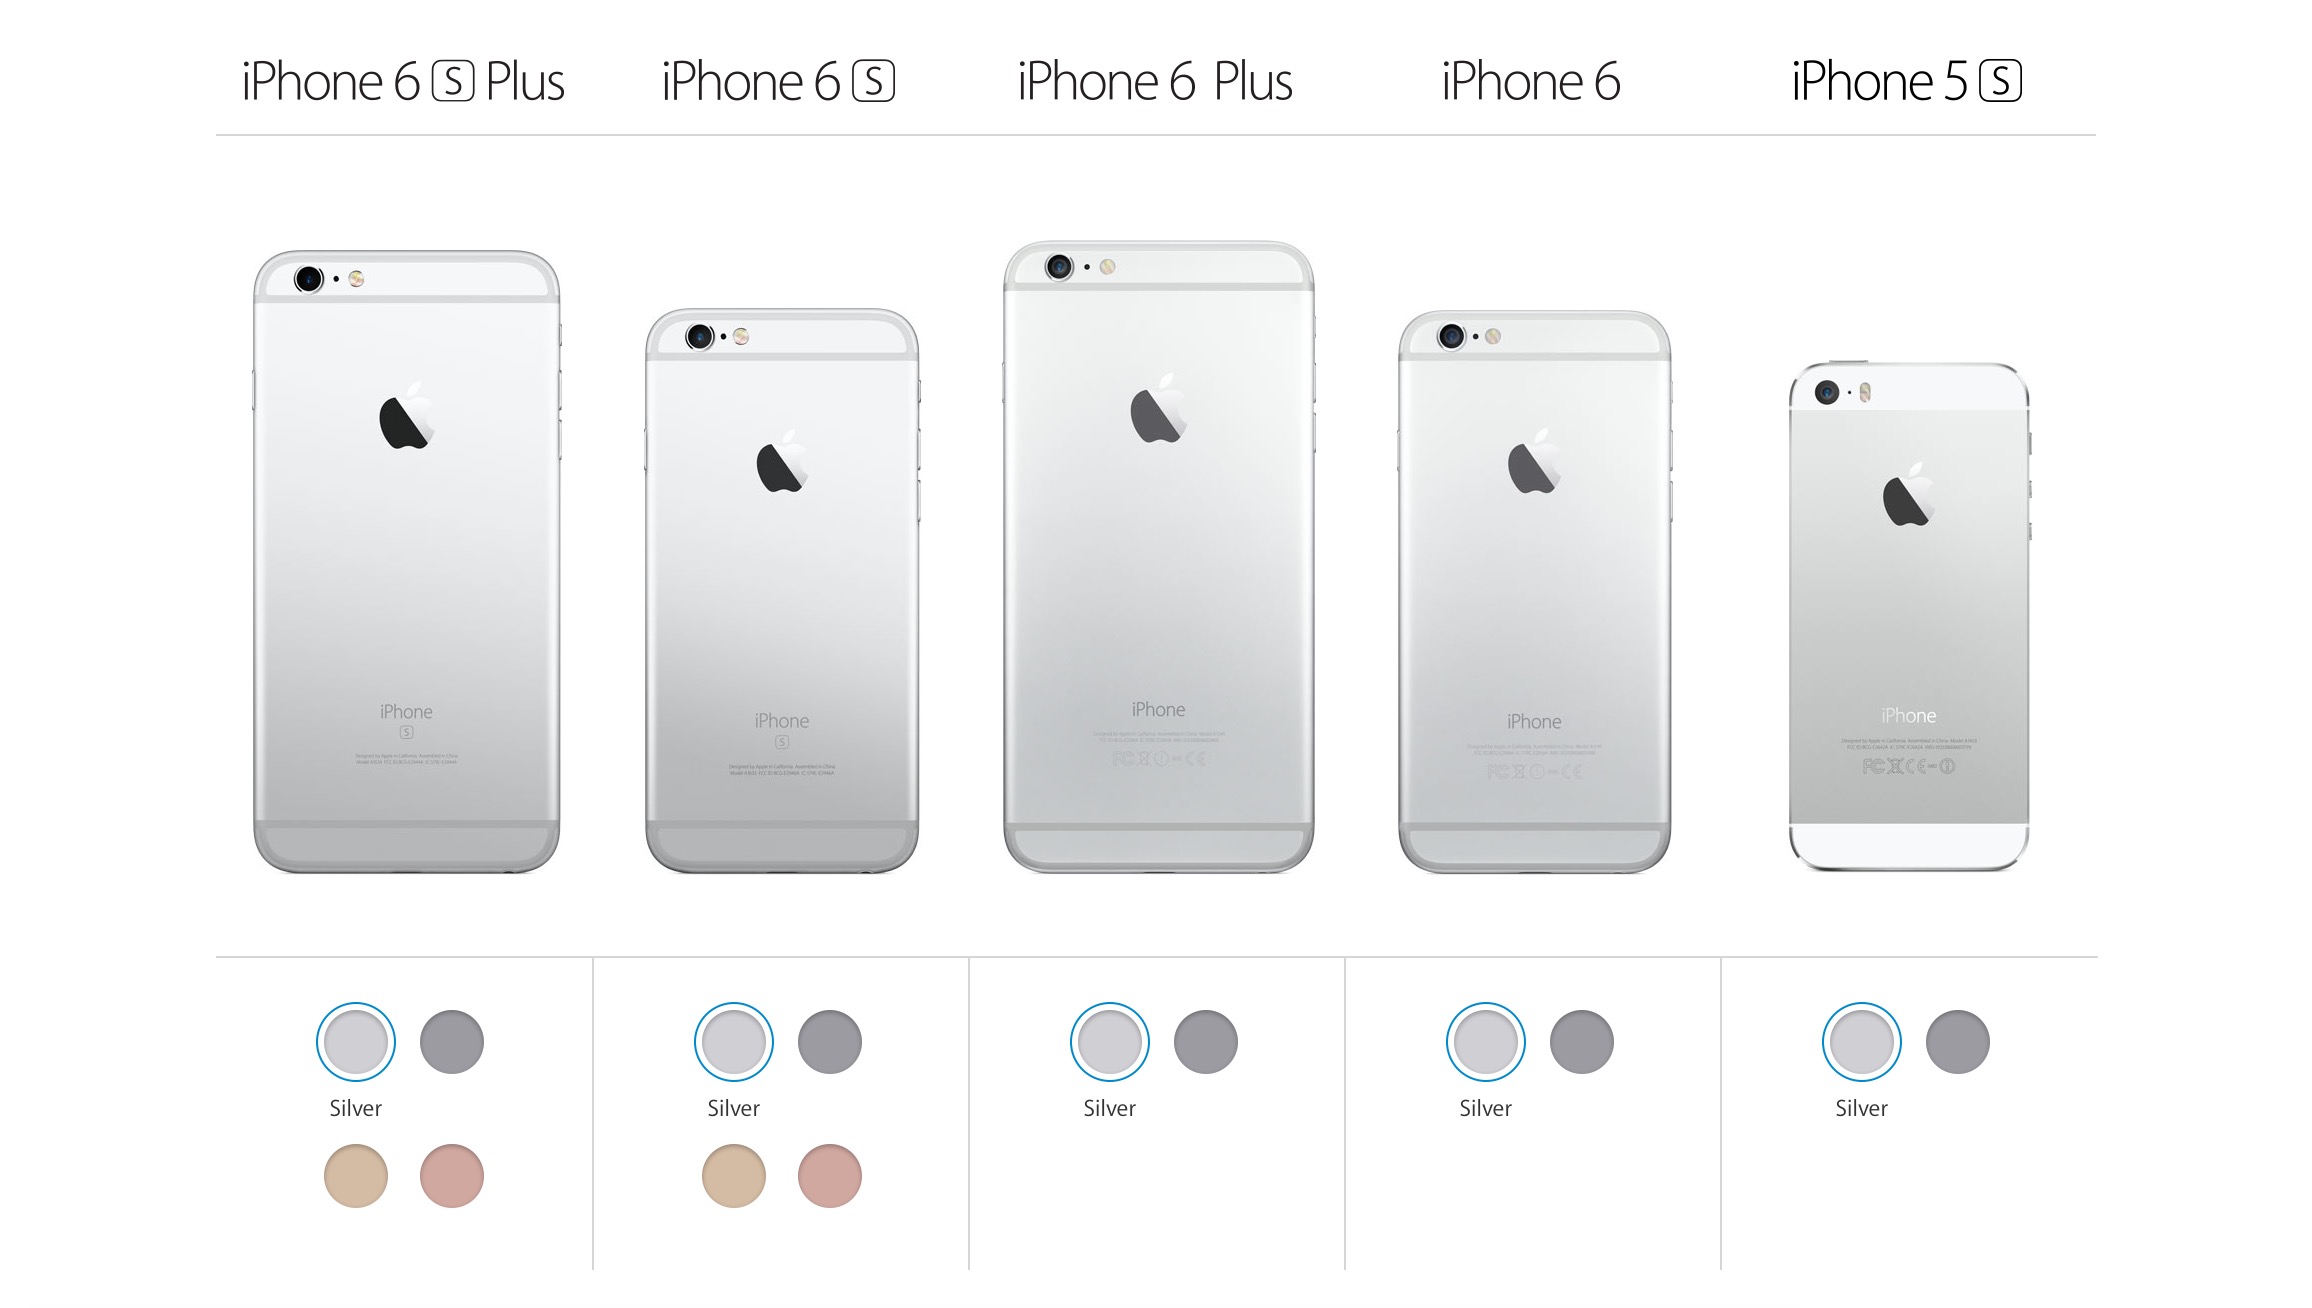 Apple Discontinues Gold Colored iPhone 6, iPhone 6 Plus, iPhone 5s